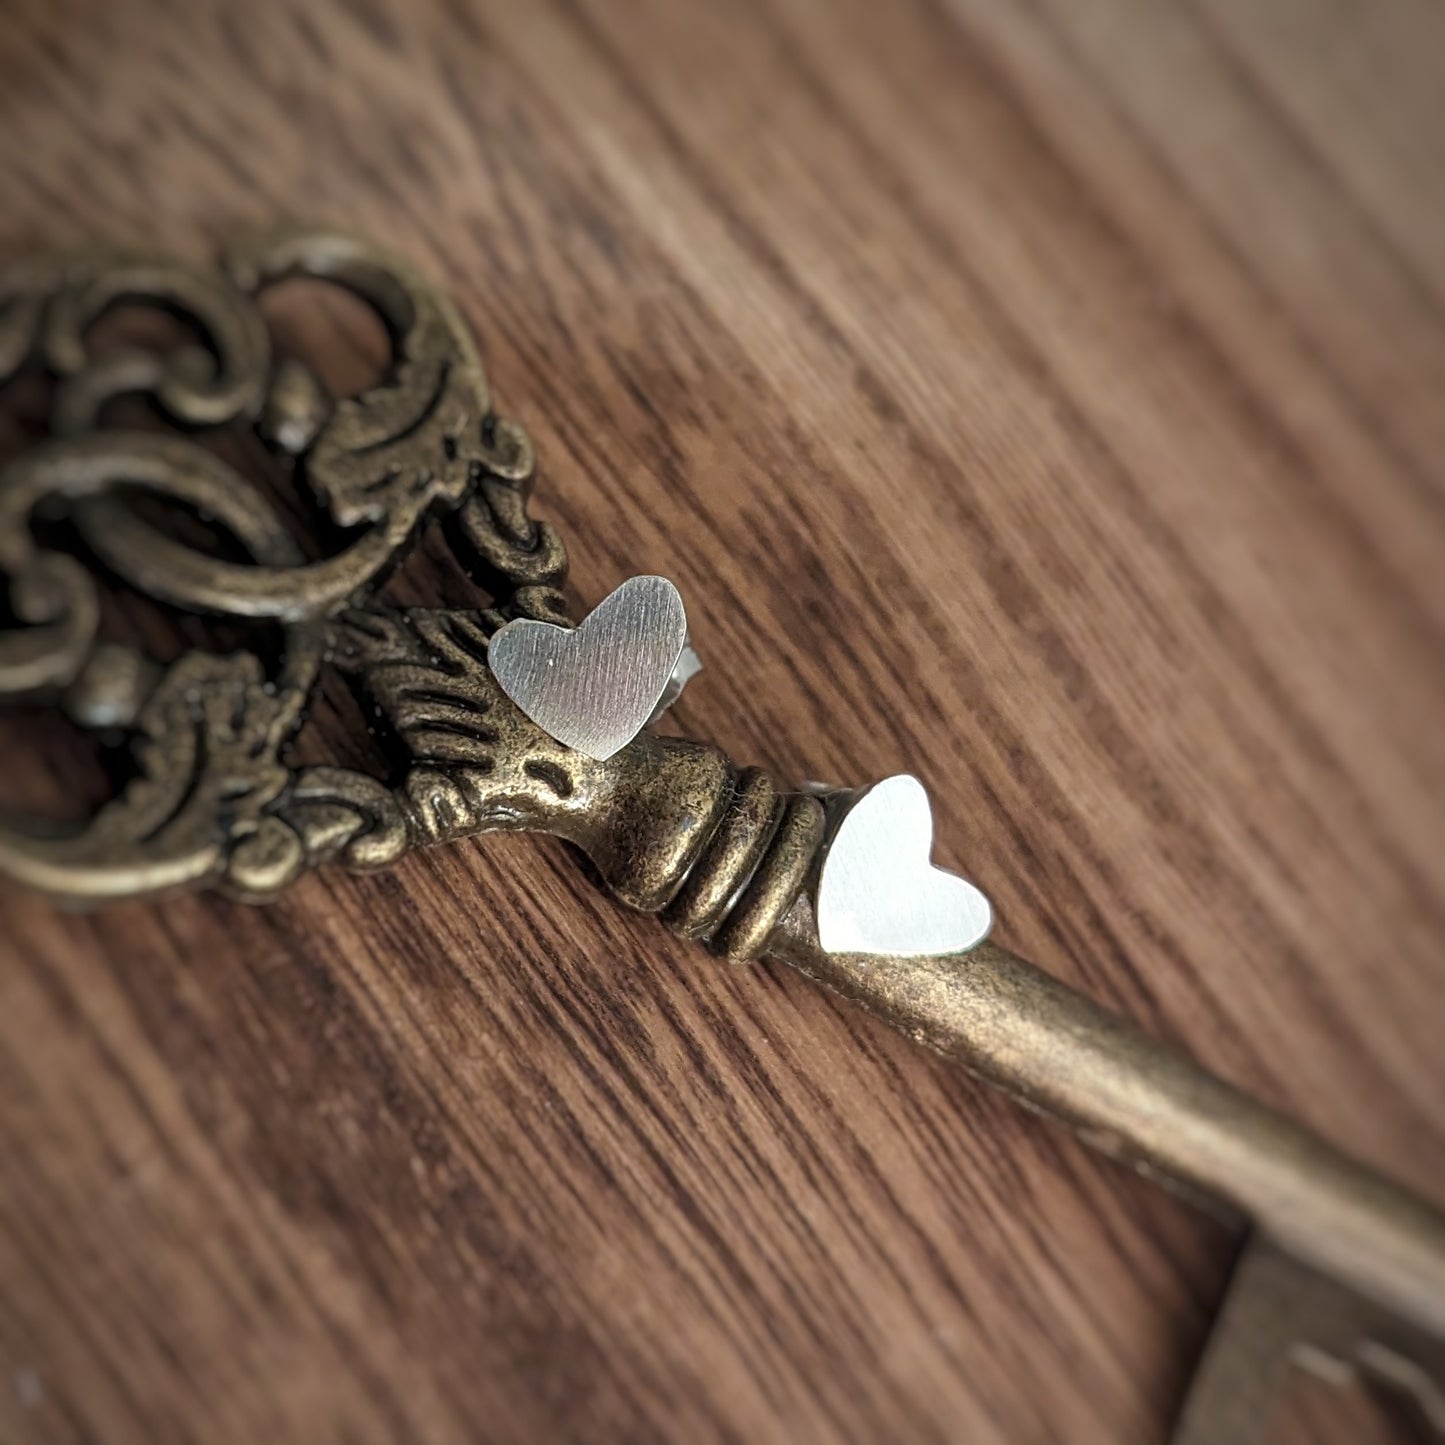 A pair of slightly textured flat silver heart stud earrings sit up against a brass key.